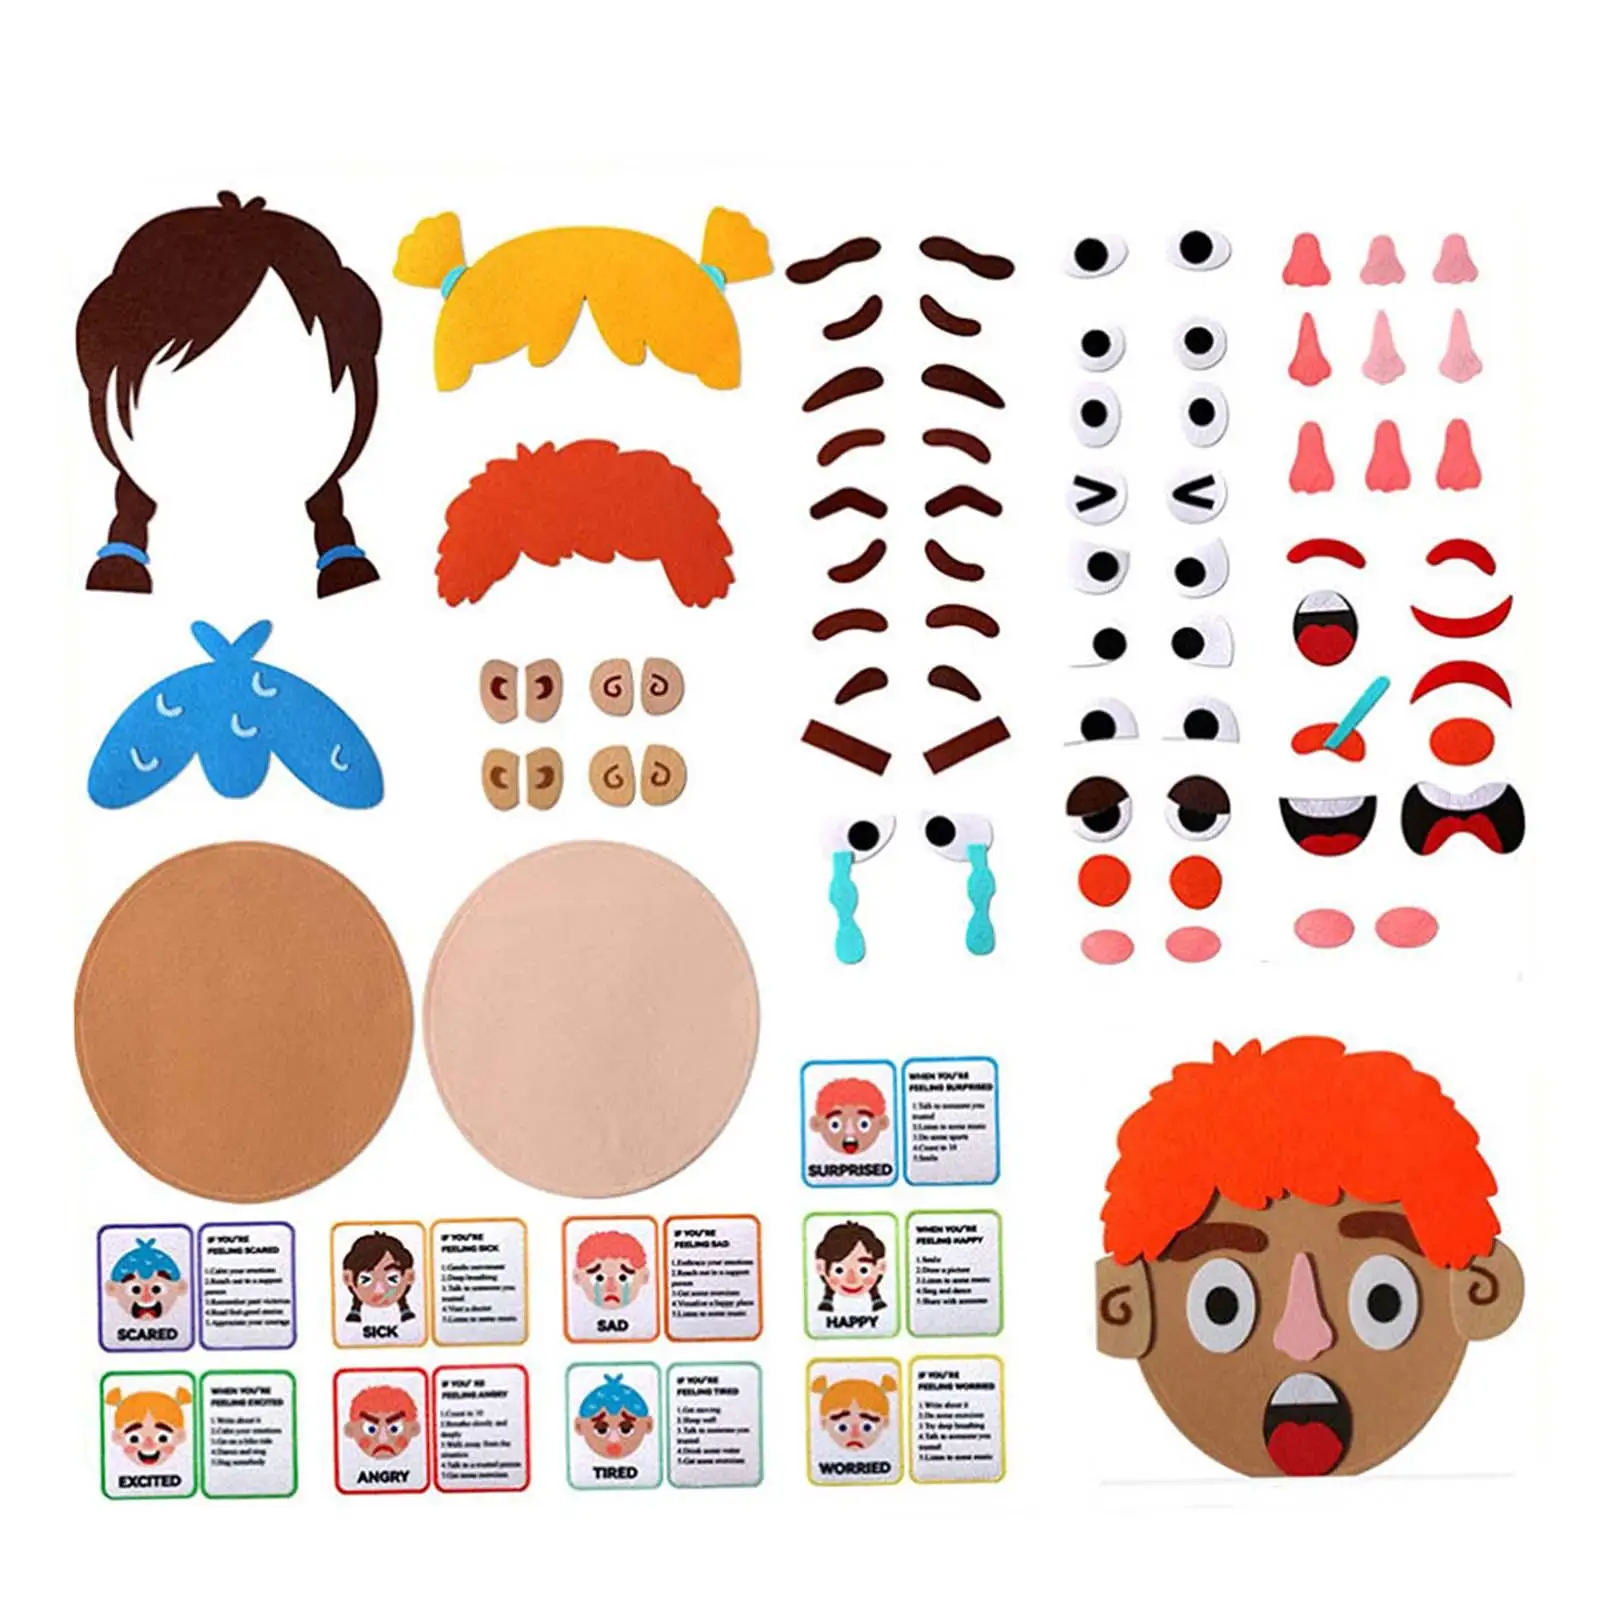 Kids Social Emotional Learning Busy Board Faces Stickers Games for Boys Kids